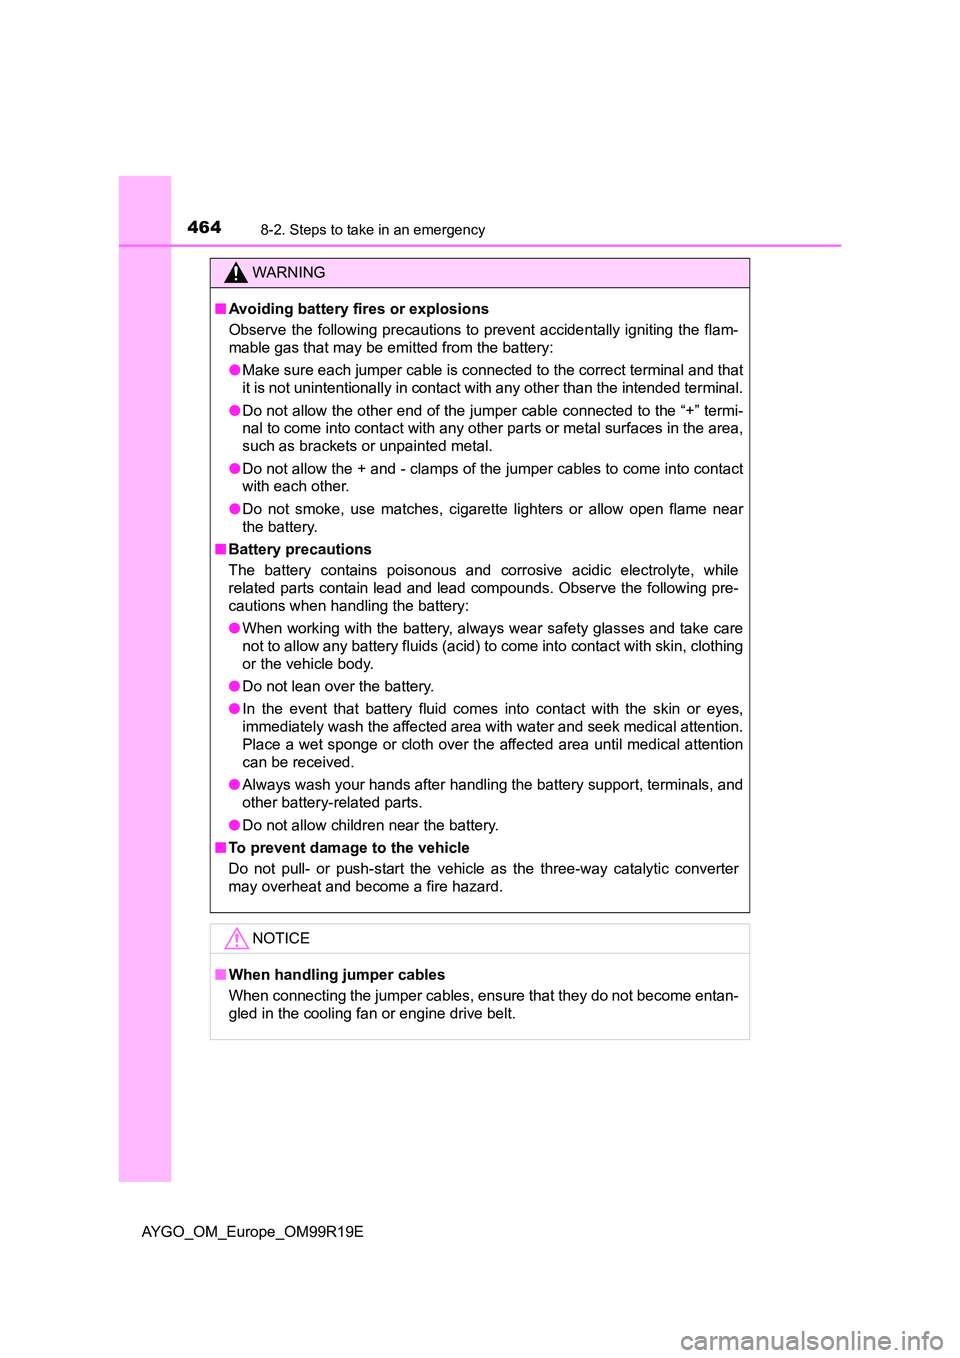 TOYOTA AYGO 2019  Owners Manual (in English) 4648-2. Steps to take in an emergency
AYGO_OM_Europe_OM99R19E
WARNING
■Avoiding battery fires or explosions 
Observe the following precautions to prevent accidentally igniting the flam- 
mable gas t